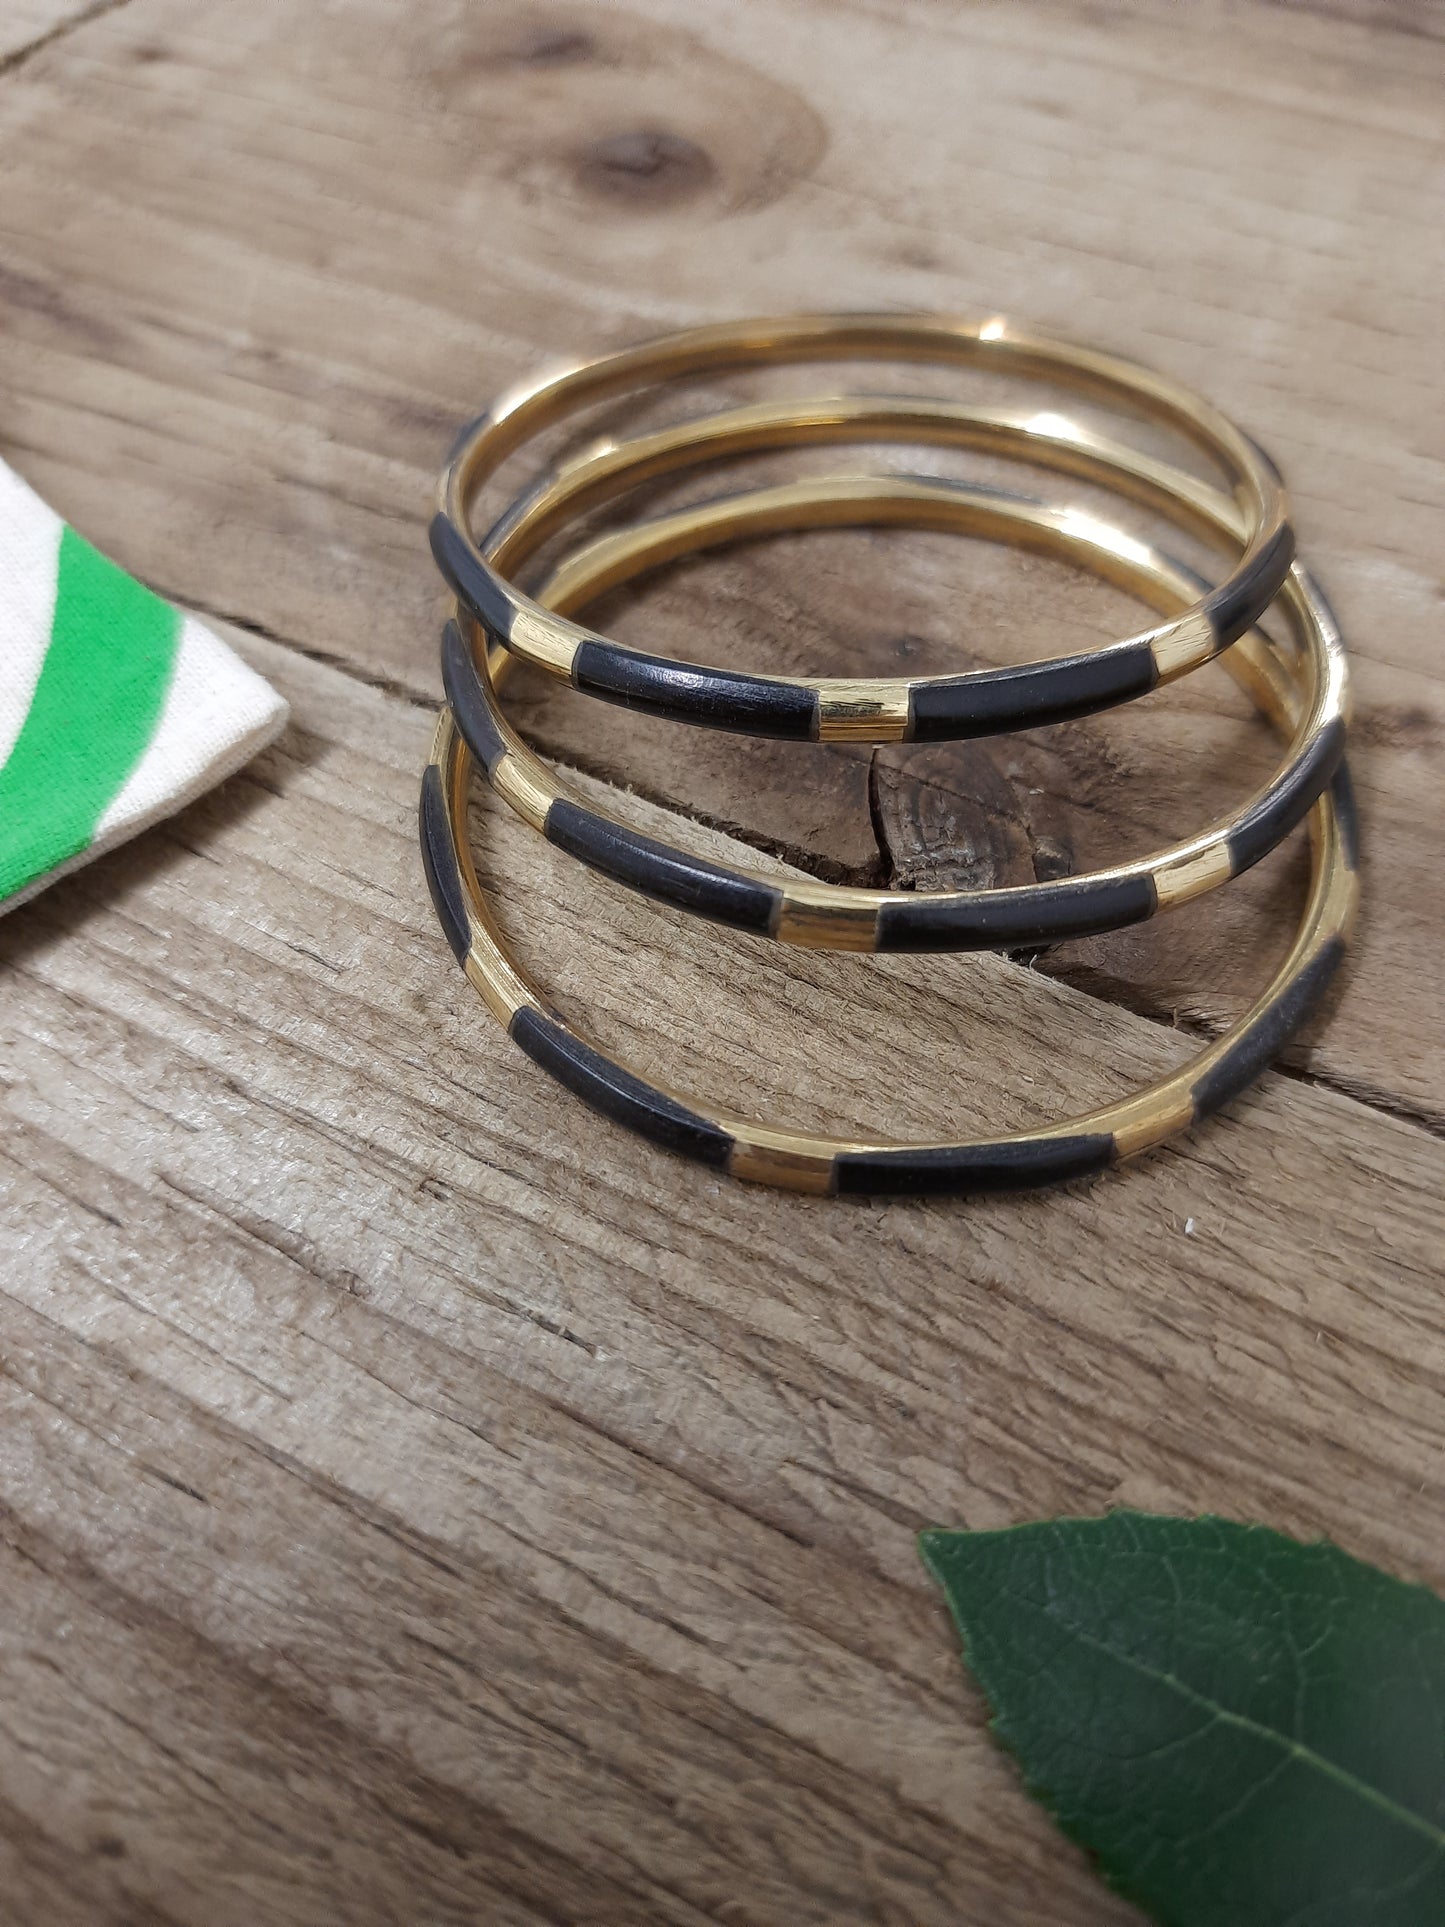 Ethical Jewellery UK | Set of 3 | Black in Colour | Fair Trade Products | Ethical Store